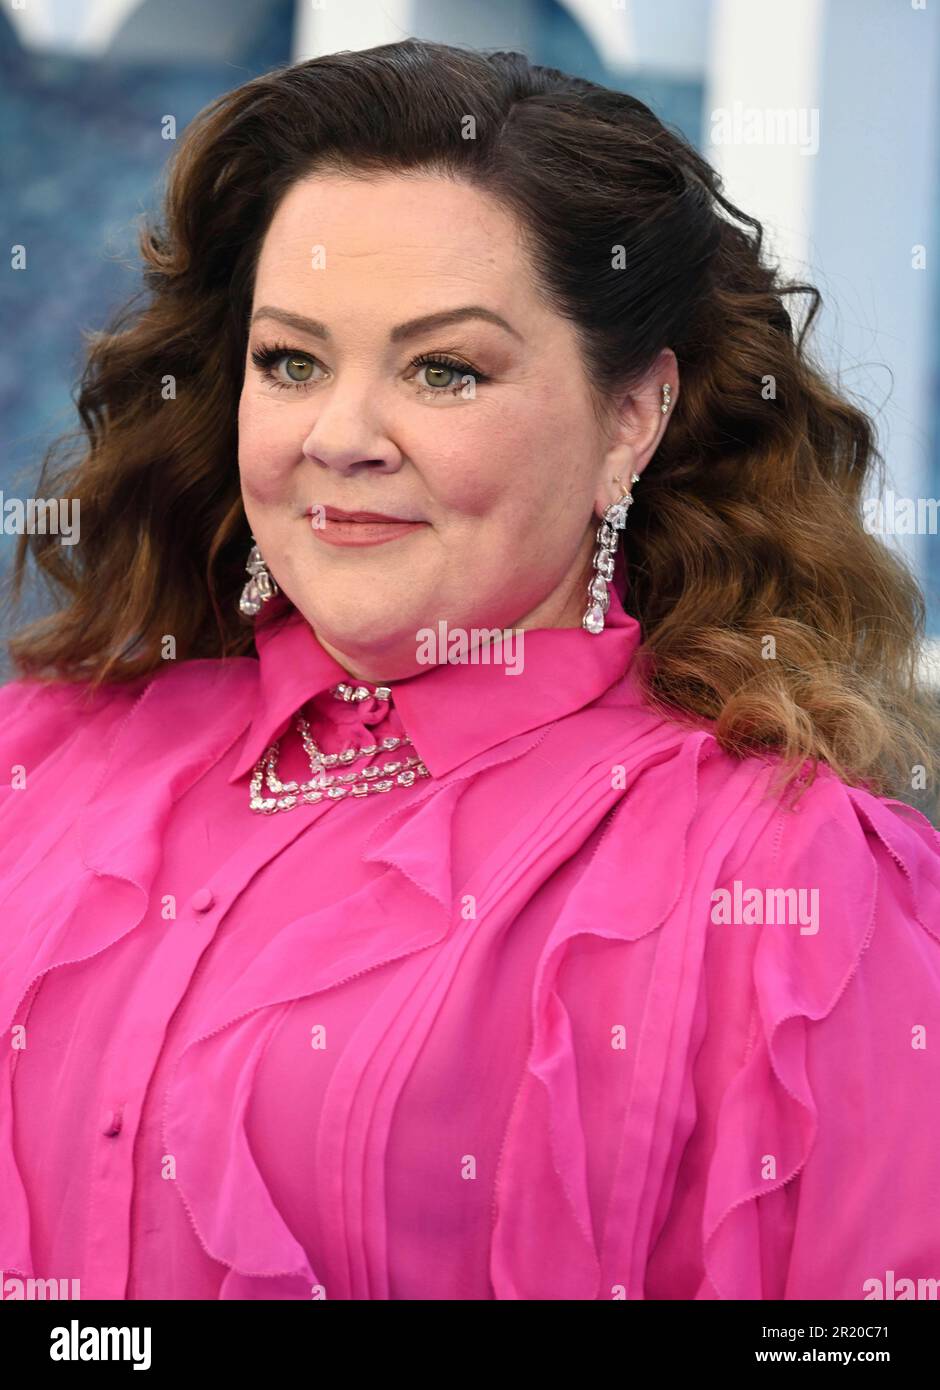 Photo by: KGC-03/STAR MAX/IPx 2023 5/15/23 Melissa McCarthy at the UK Premiere of 'The Little Mermaid' on May 15, 2023 in London, England. Stock Photo